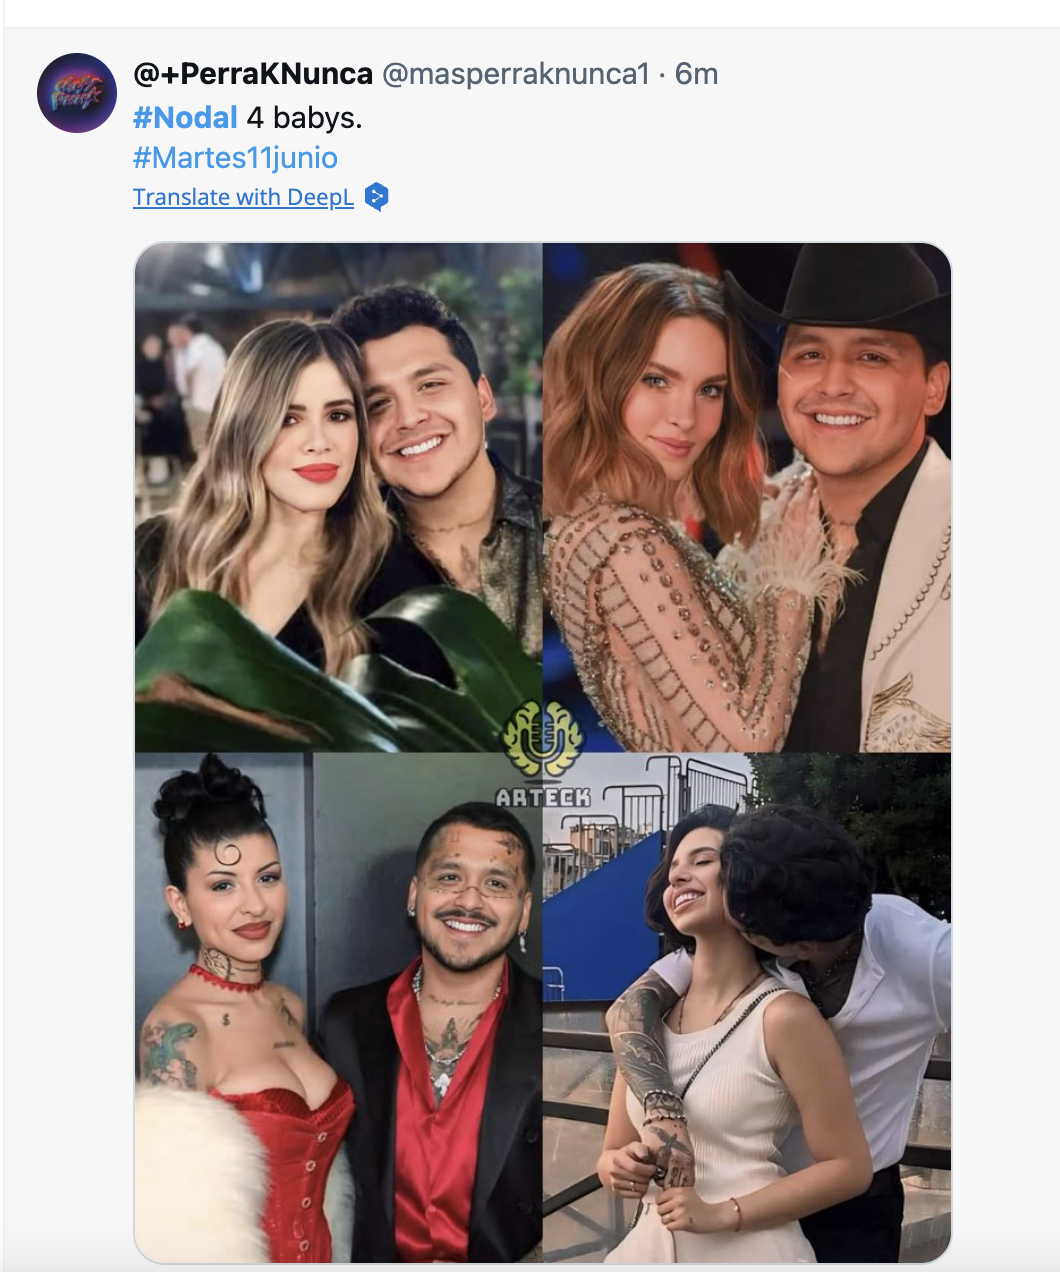 Memes about Christian Nodal and Angela Aguilar